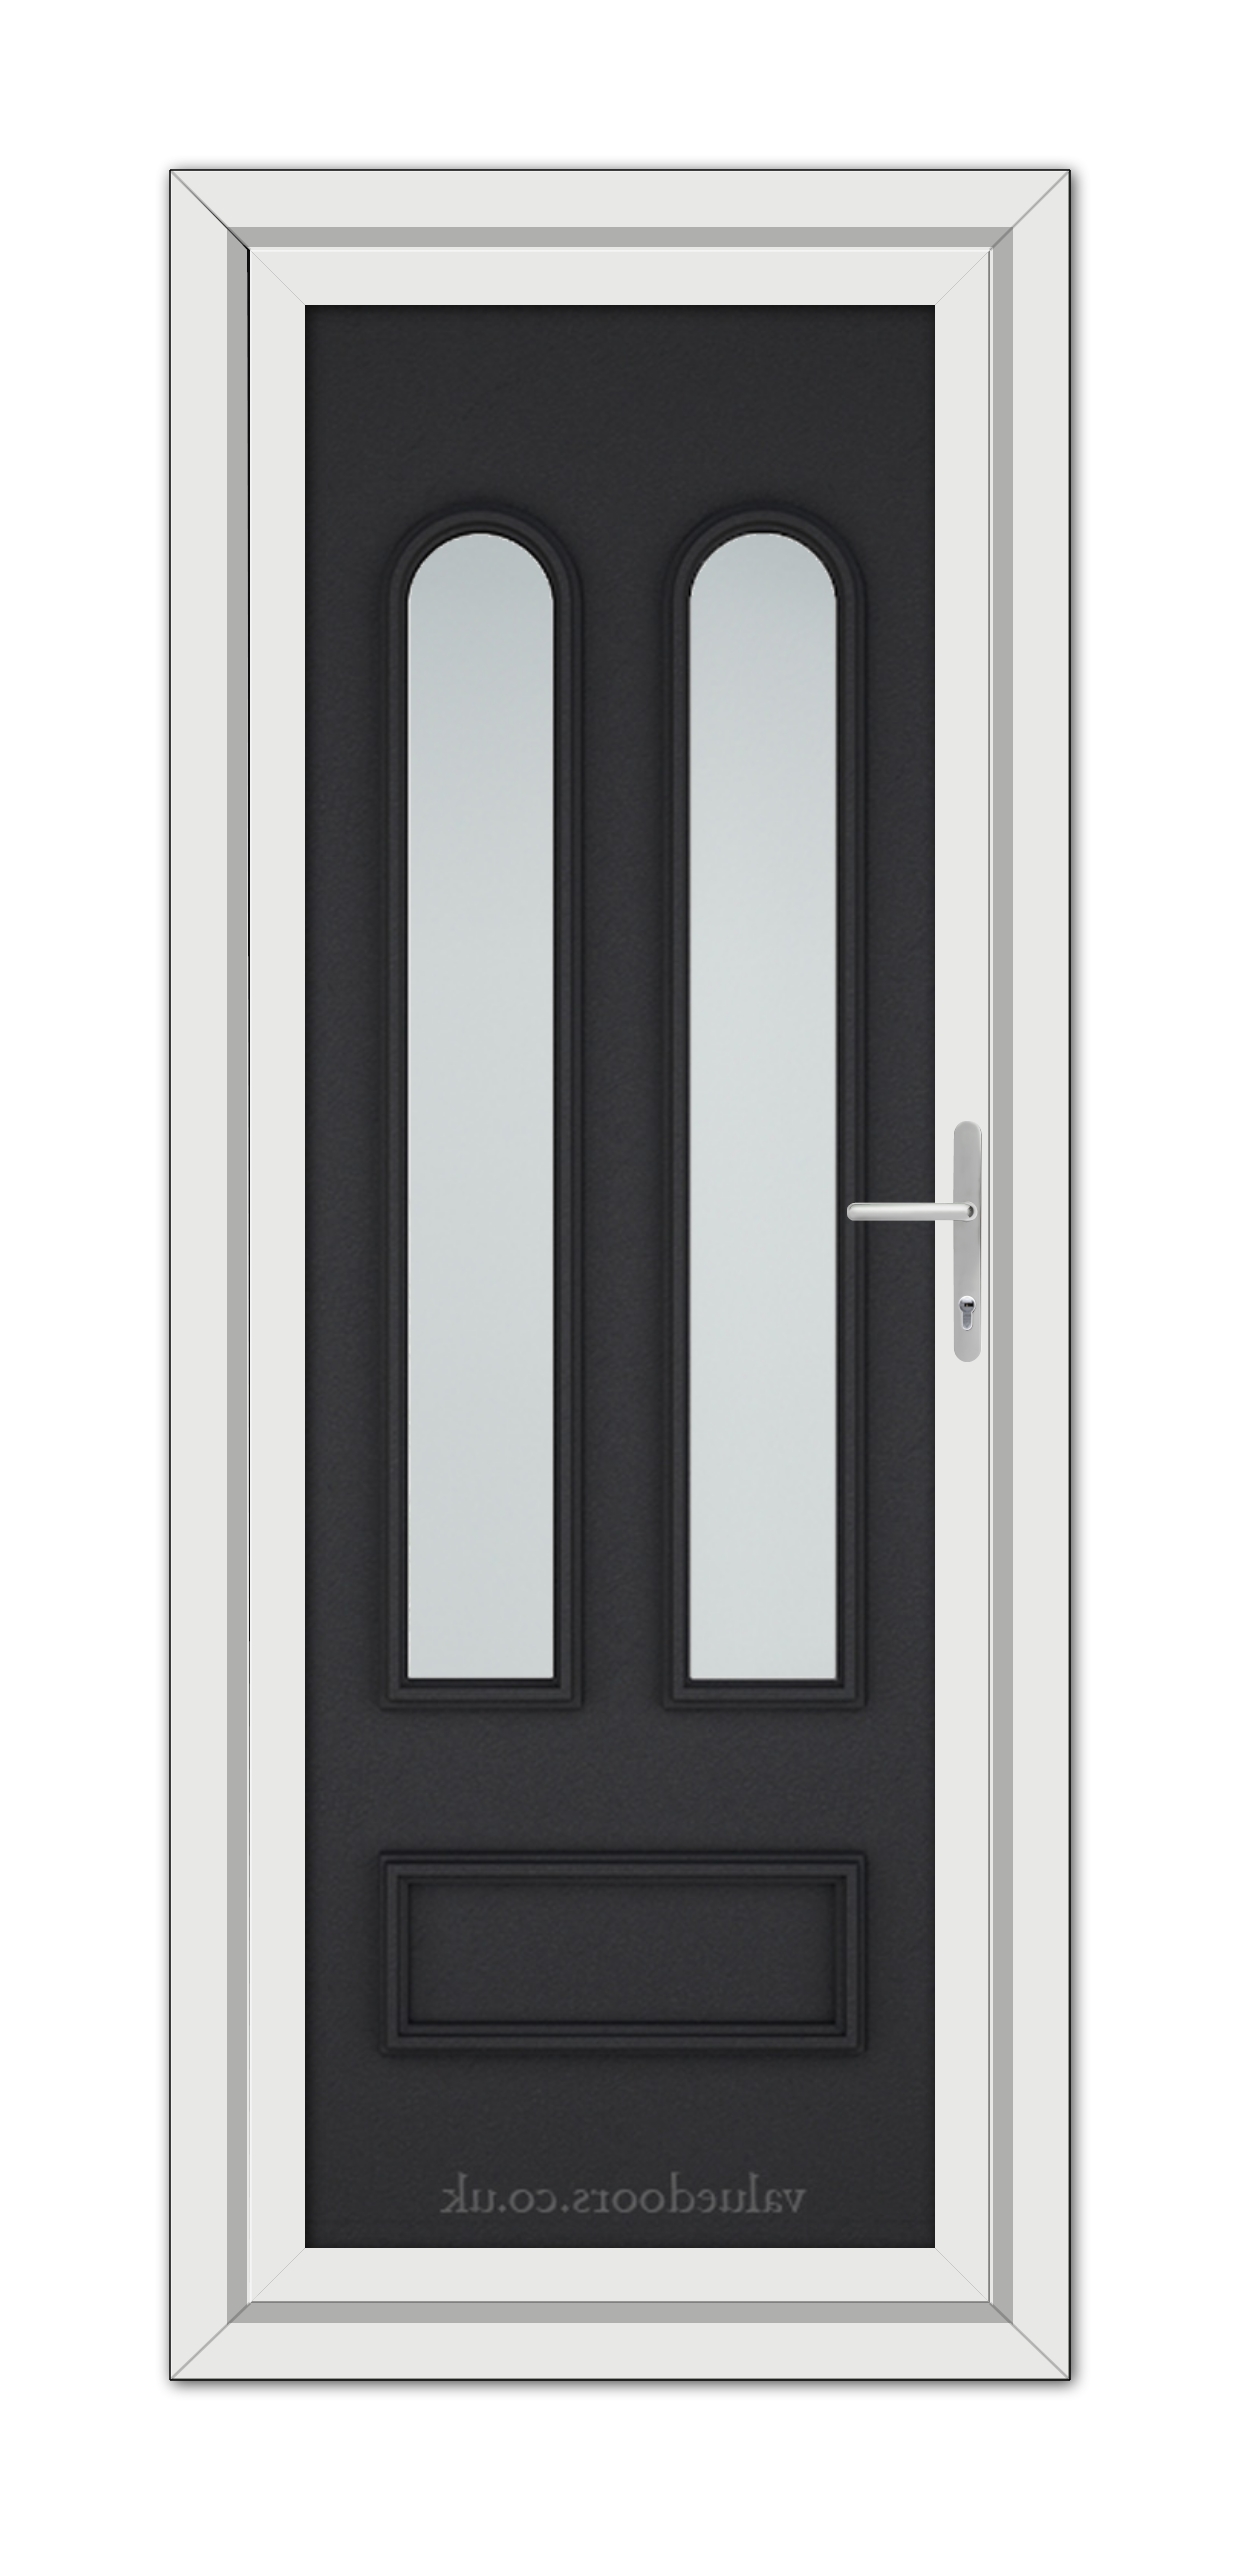 Vertical image of a Black Brown Madrid uPVC Door, featuring a dark gray color with two slim, vertical frosted glass panels and a metal handle, framed by a white door frame.